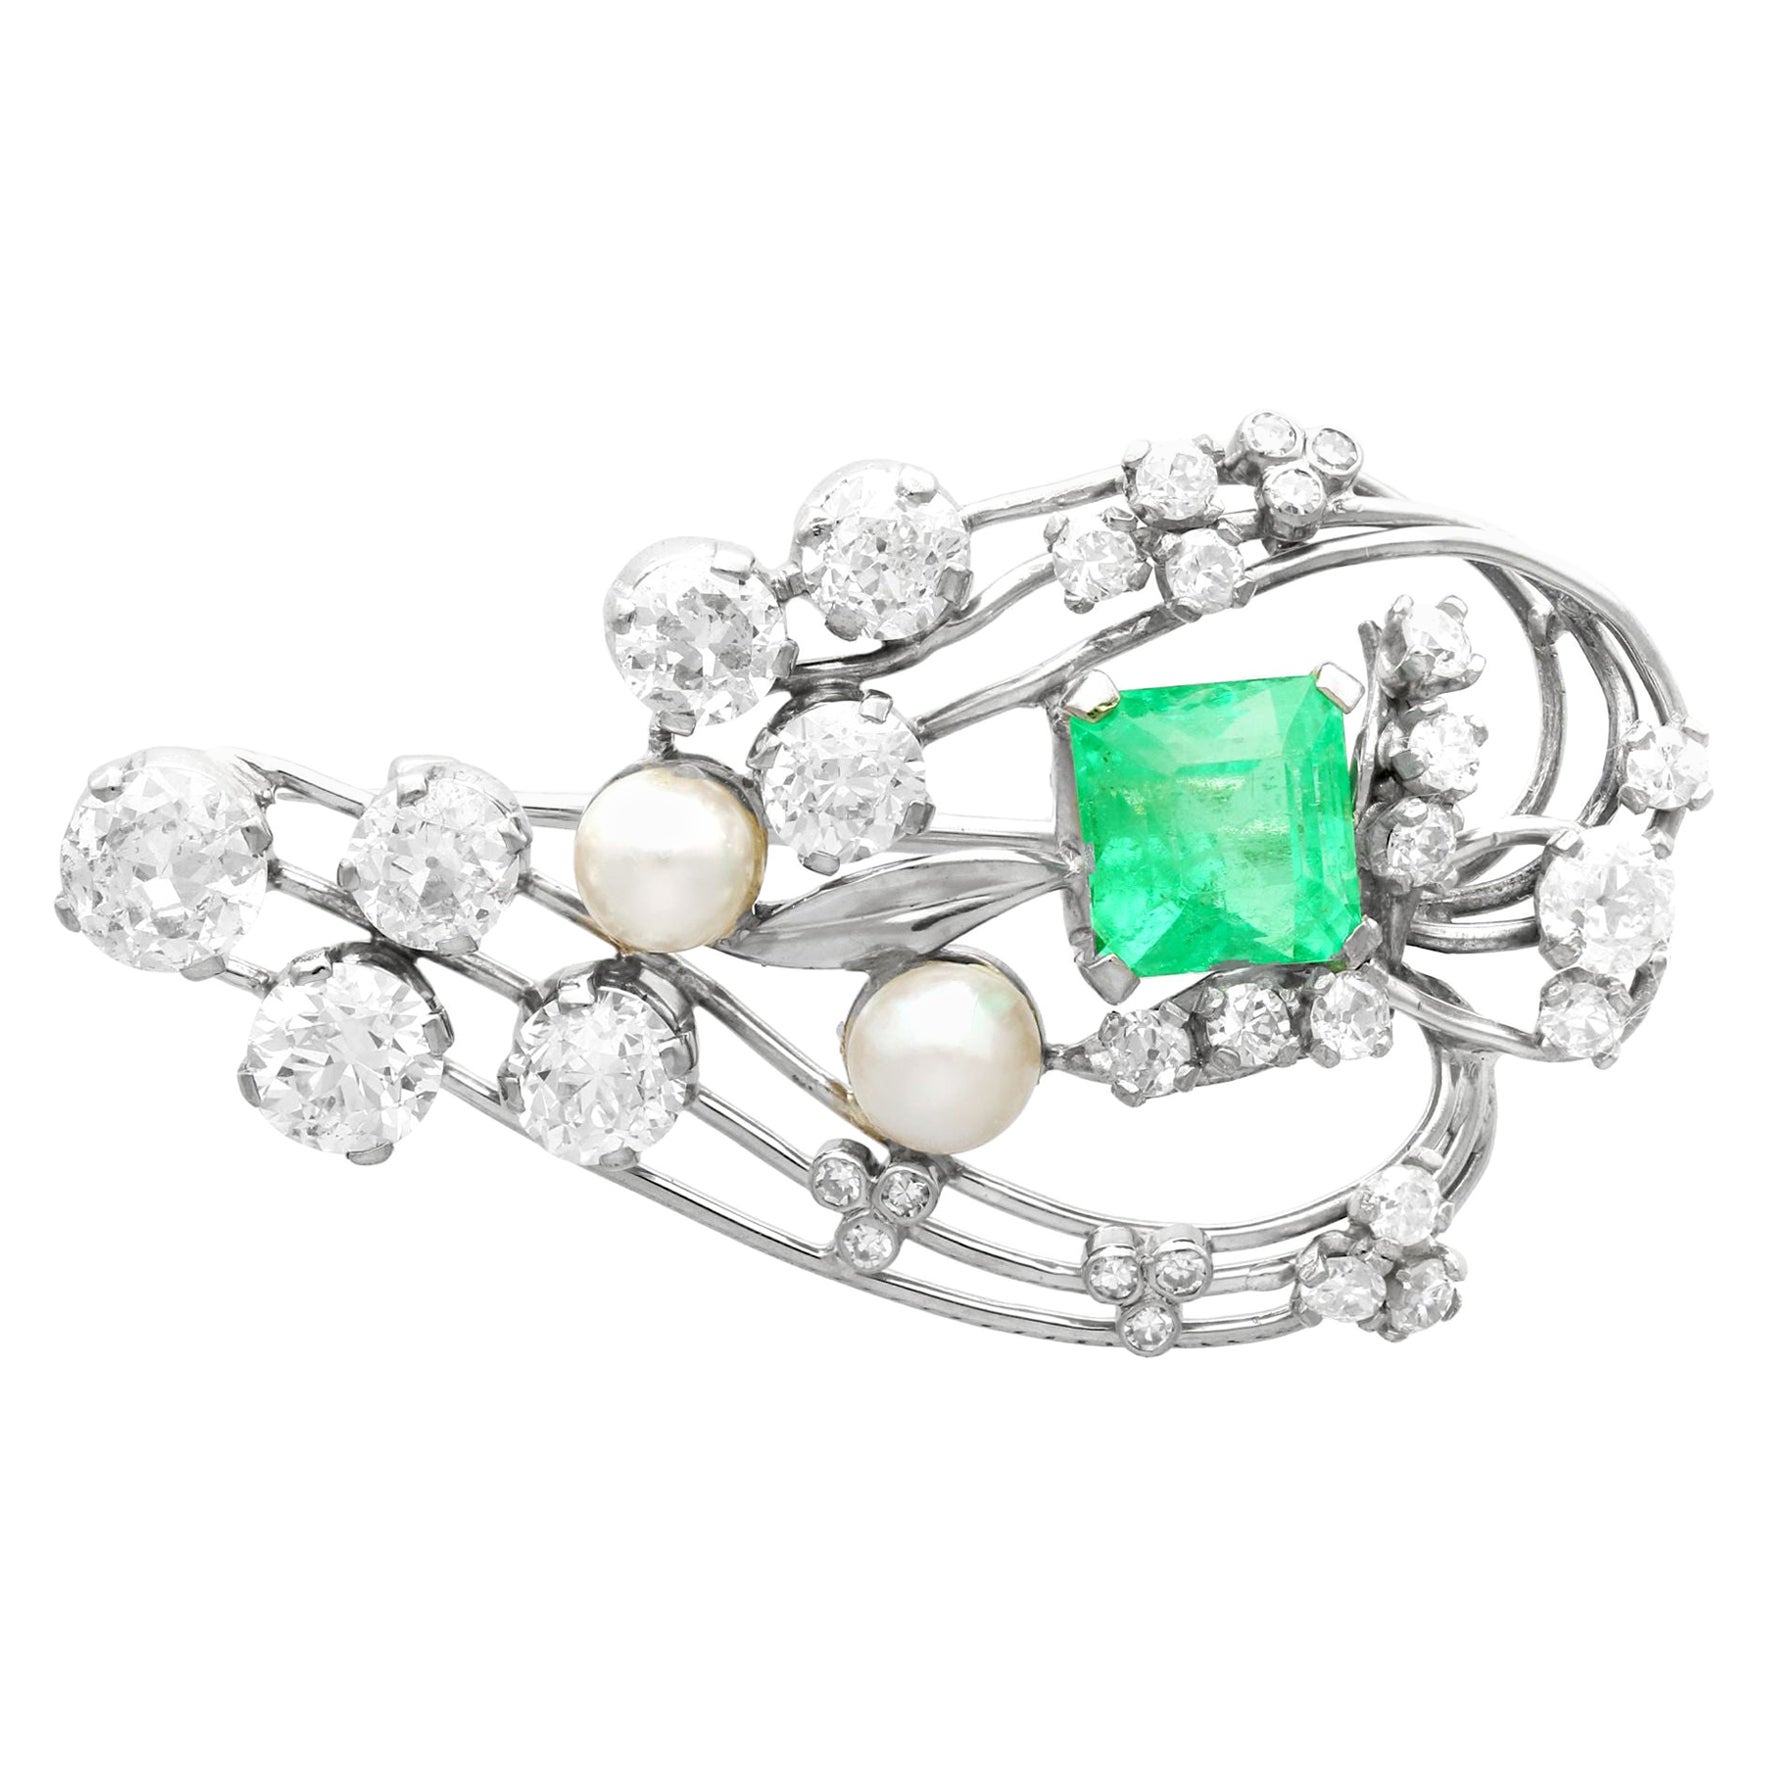 1920s Antique 3.19 Carat Emerald 4.38 Carat Diamond and Pearl Gold Brooch For Sale